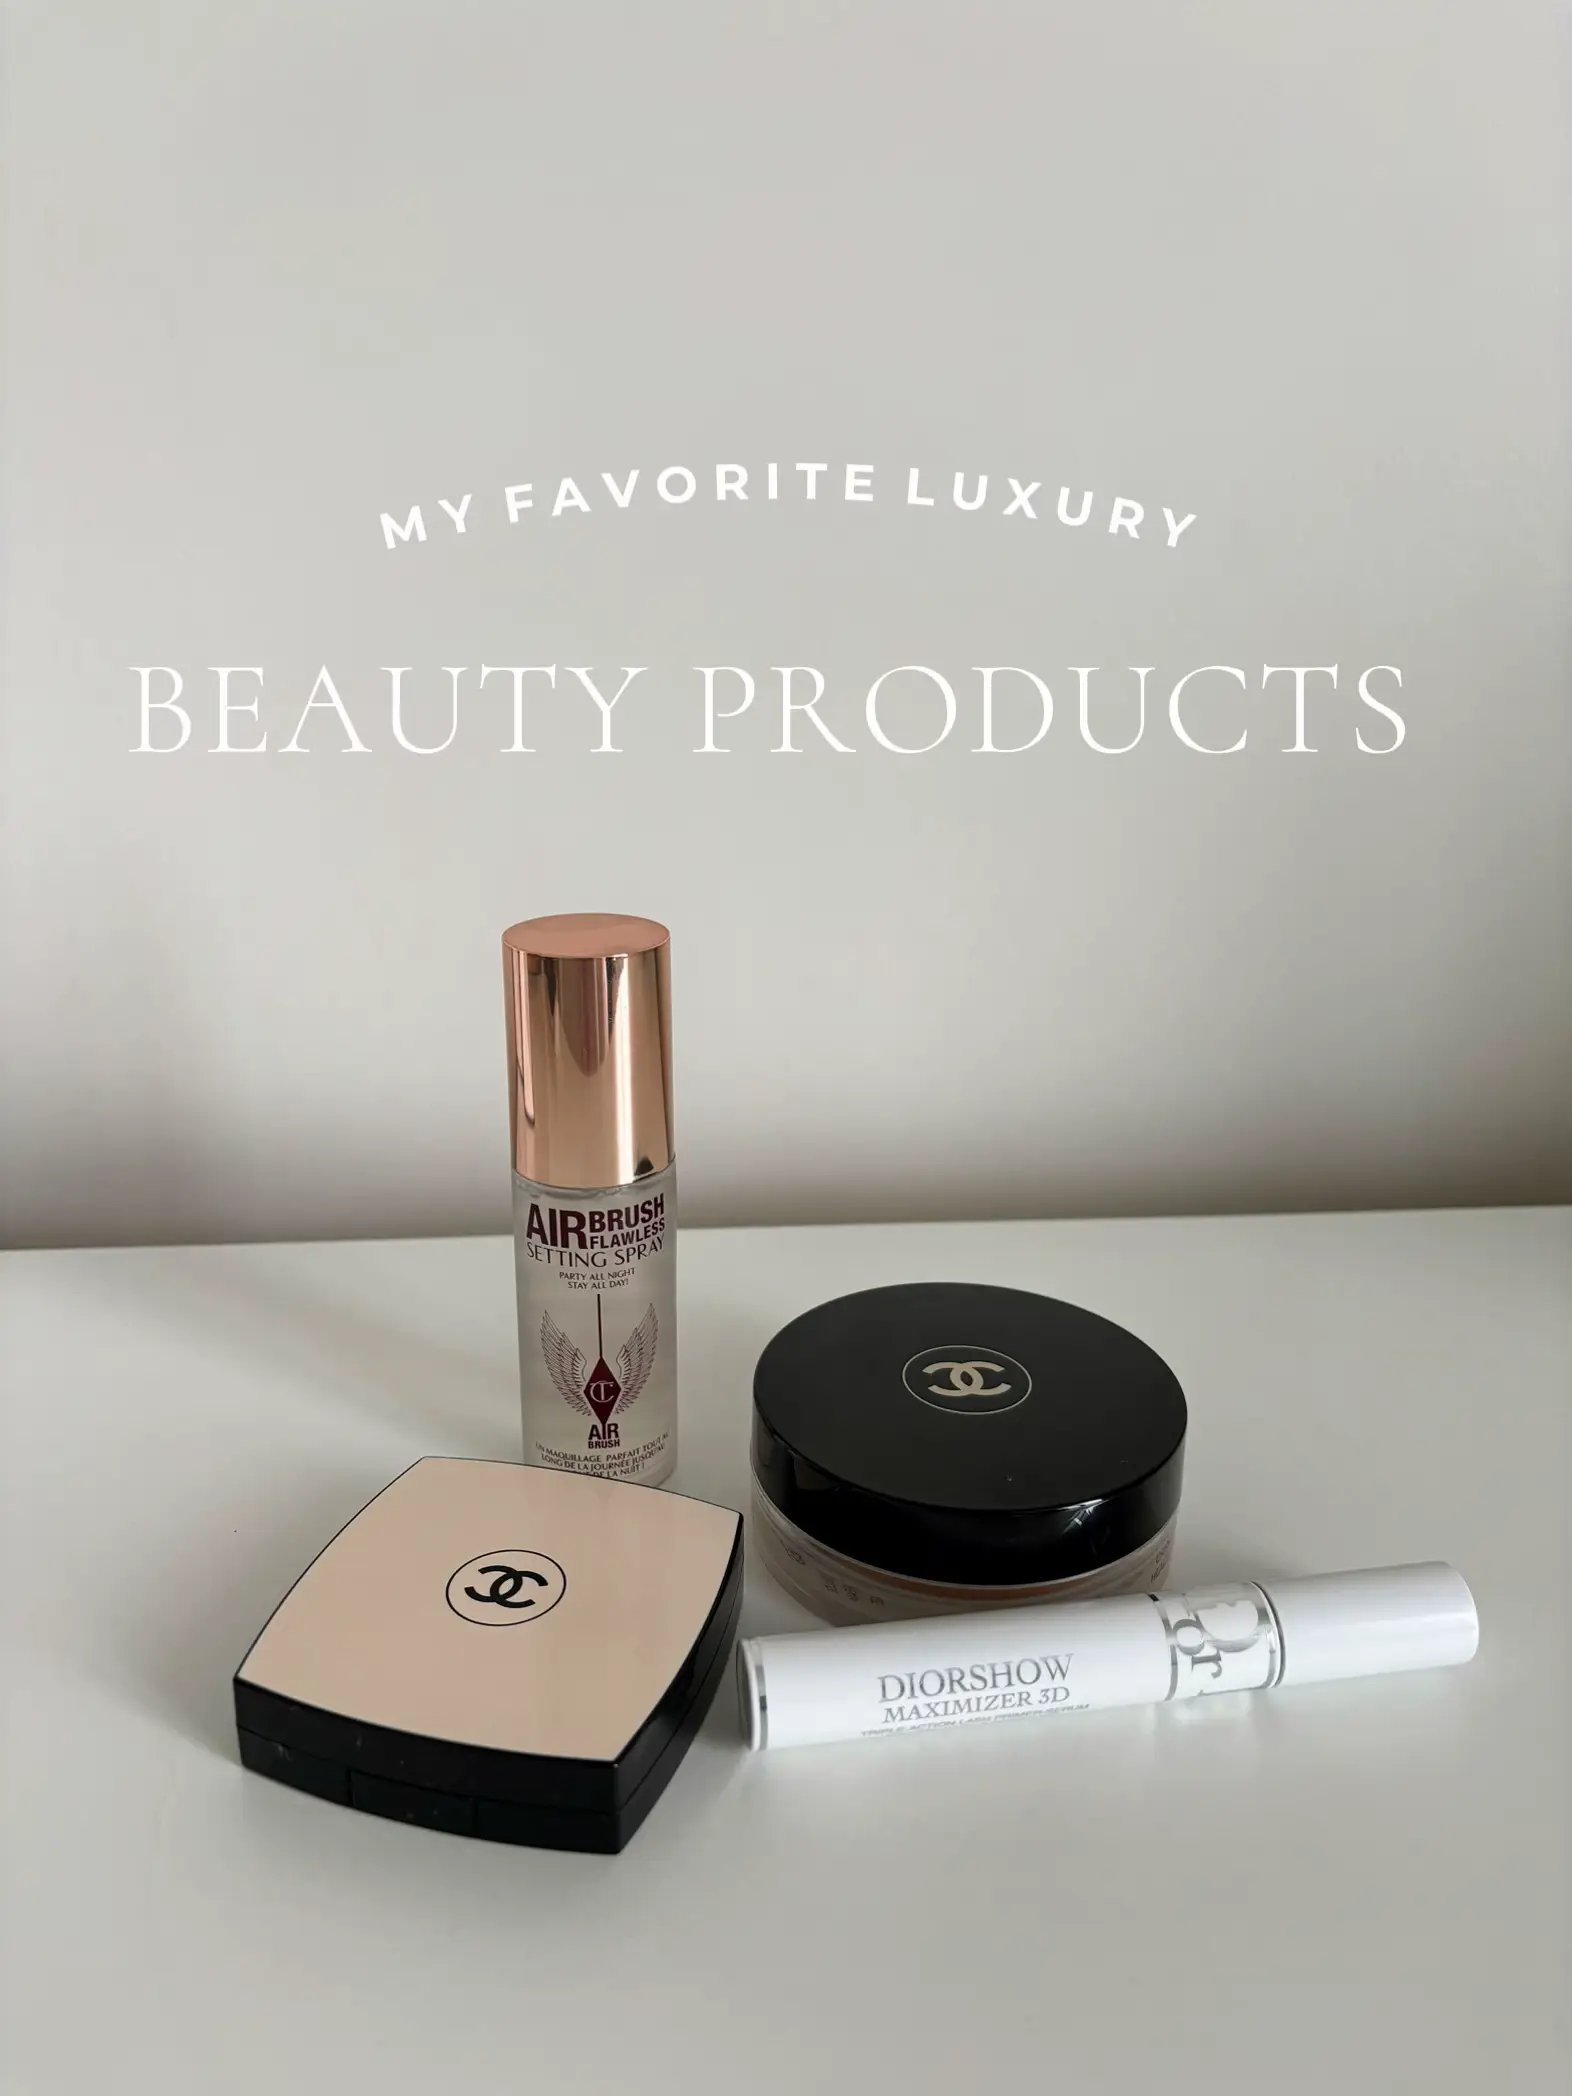 My Favorite Luxury Beauty Products